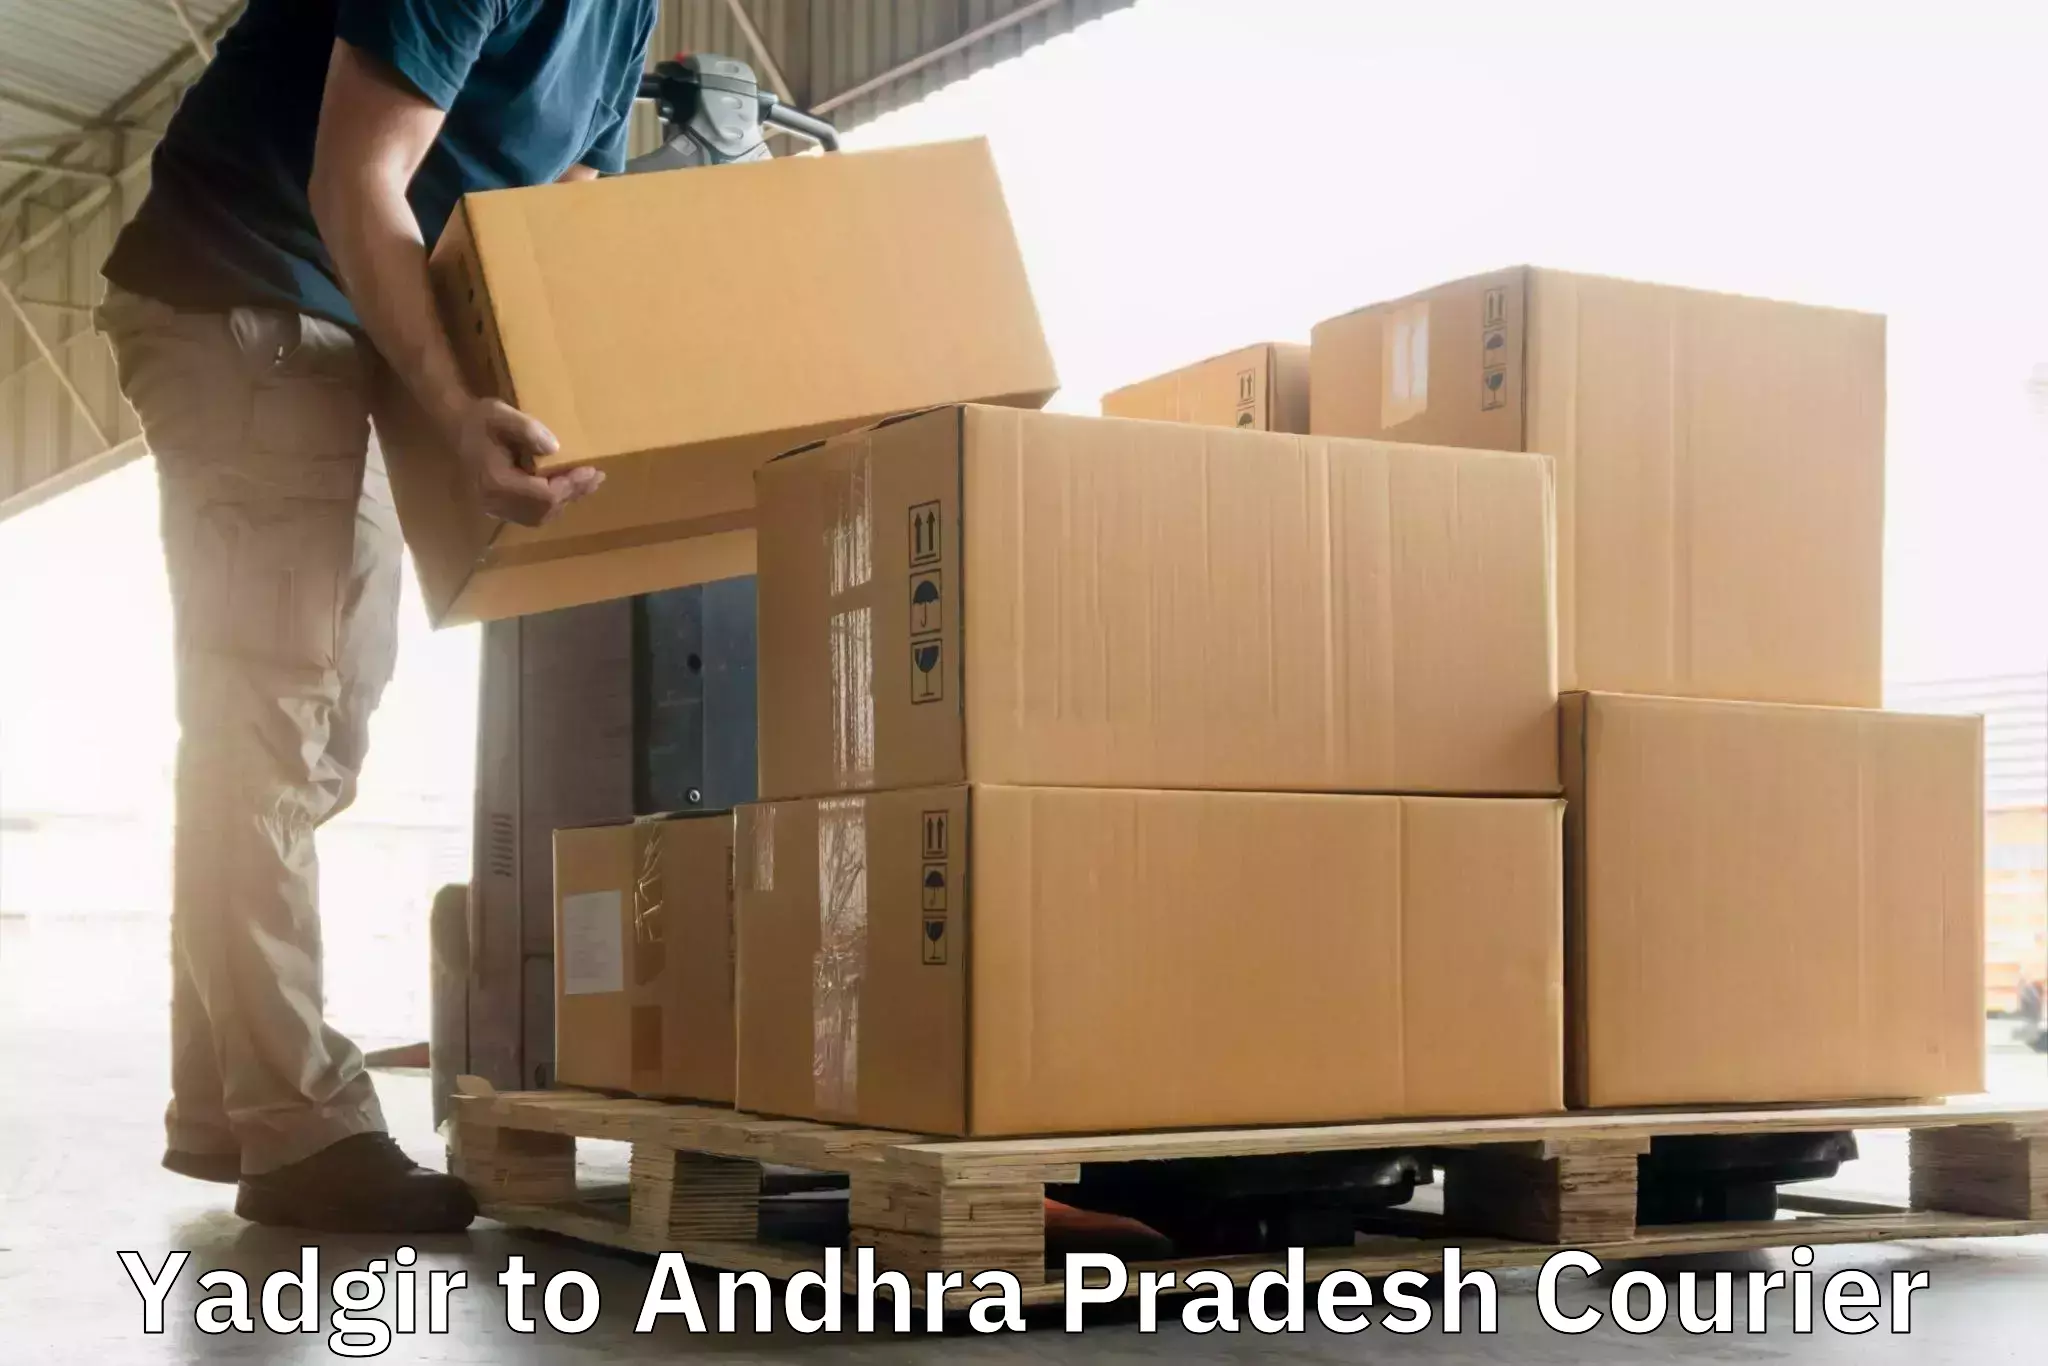 State-of-the-art courier technology Yadgir to Andhra Pradesh